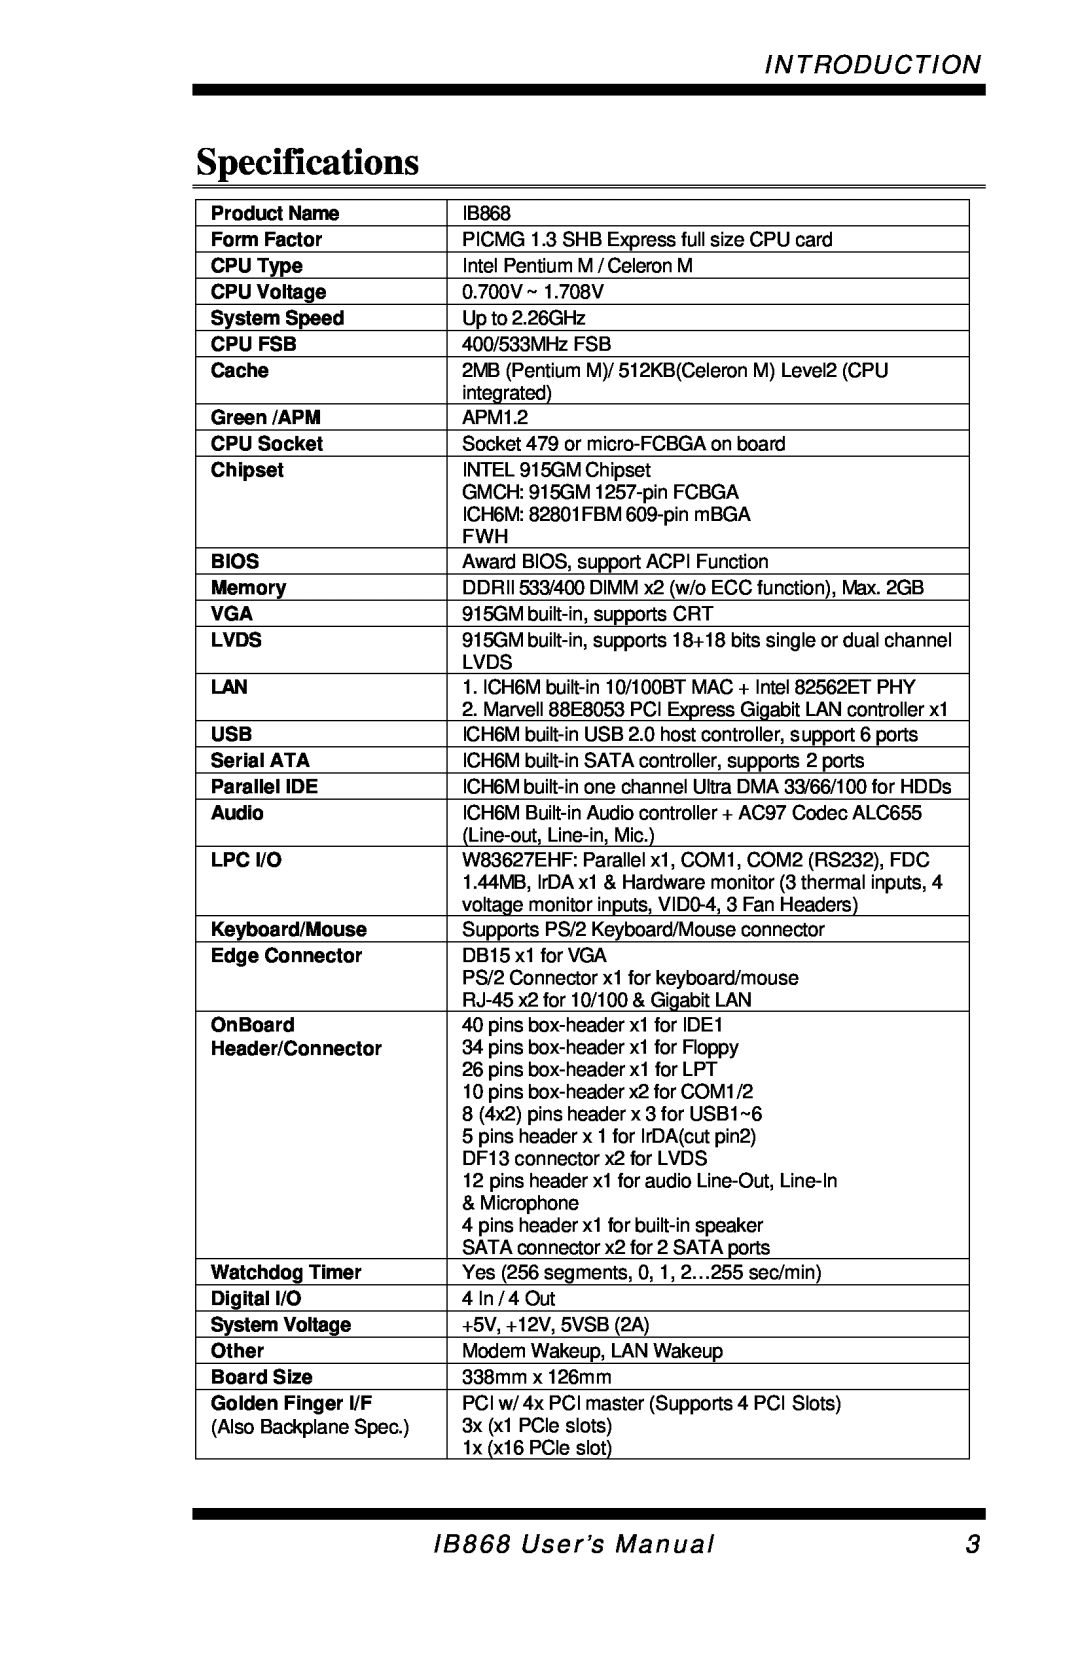 Intel user manual Specifications, Introduction, IB868 User’s Manual 